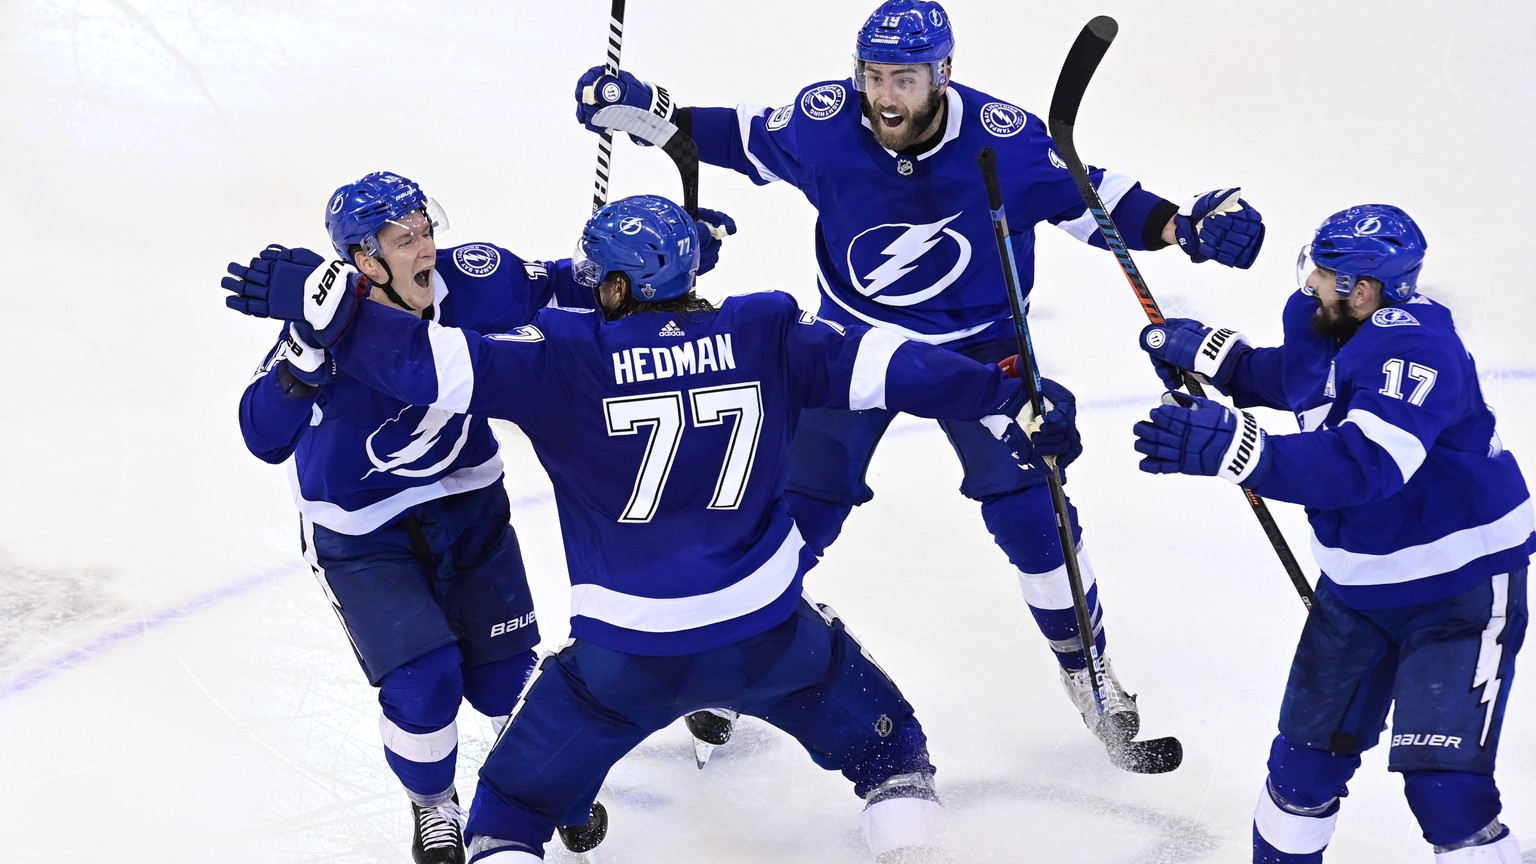 Tampa Bay Lightning defenseman Victor Hedman (77) celebrates his winning goal against the Boston Bruins with teammates Ondrej Palat (18), Patrick Maroon (14) and Alex Killorn (17) during the second ov ...